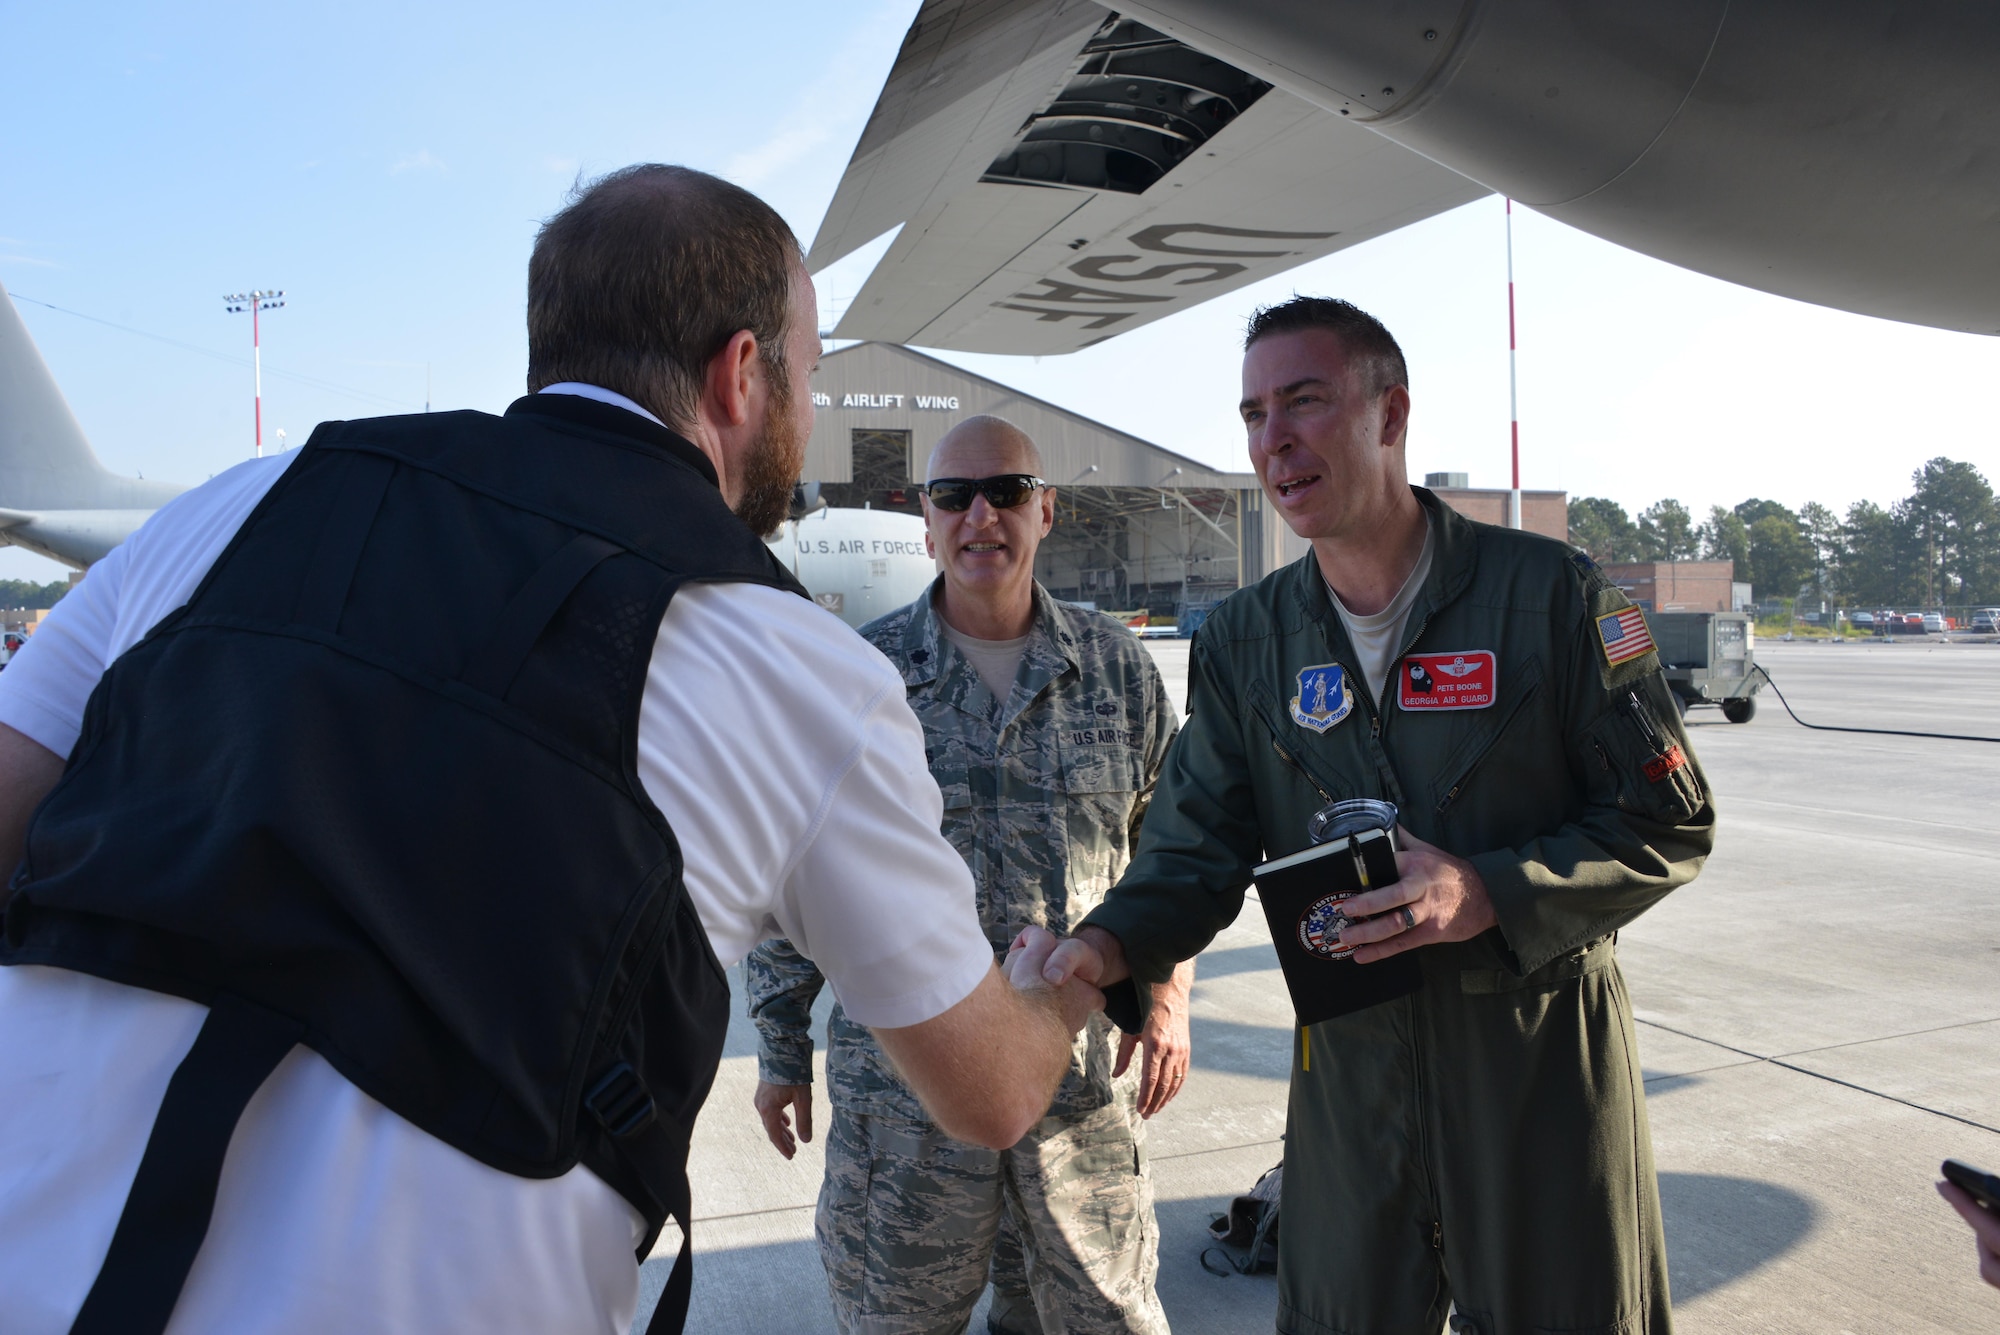 Col. Peter Boone, Air Commander of the 165th Airlift Wing, greets WTOC videographer Sean Evans before a C-130H aircraft departs Savannah to deliver supplies to St. Thomas, Virgin Islands Sept. 22, 2017. Evans is traveling along with a media team covering hurricane relief efforts on the ravaged Caribbean island. (U.S. Air National Guard photo by Staff Sgt. Chelsea Smith)